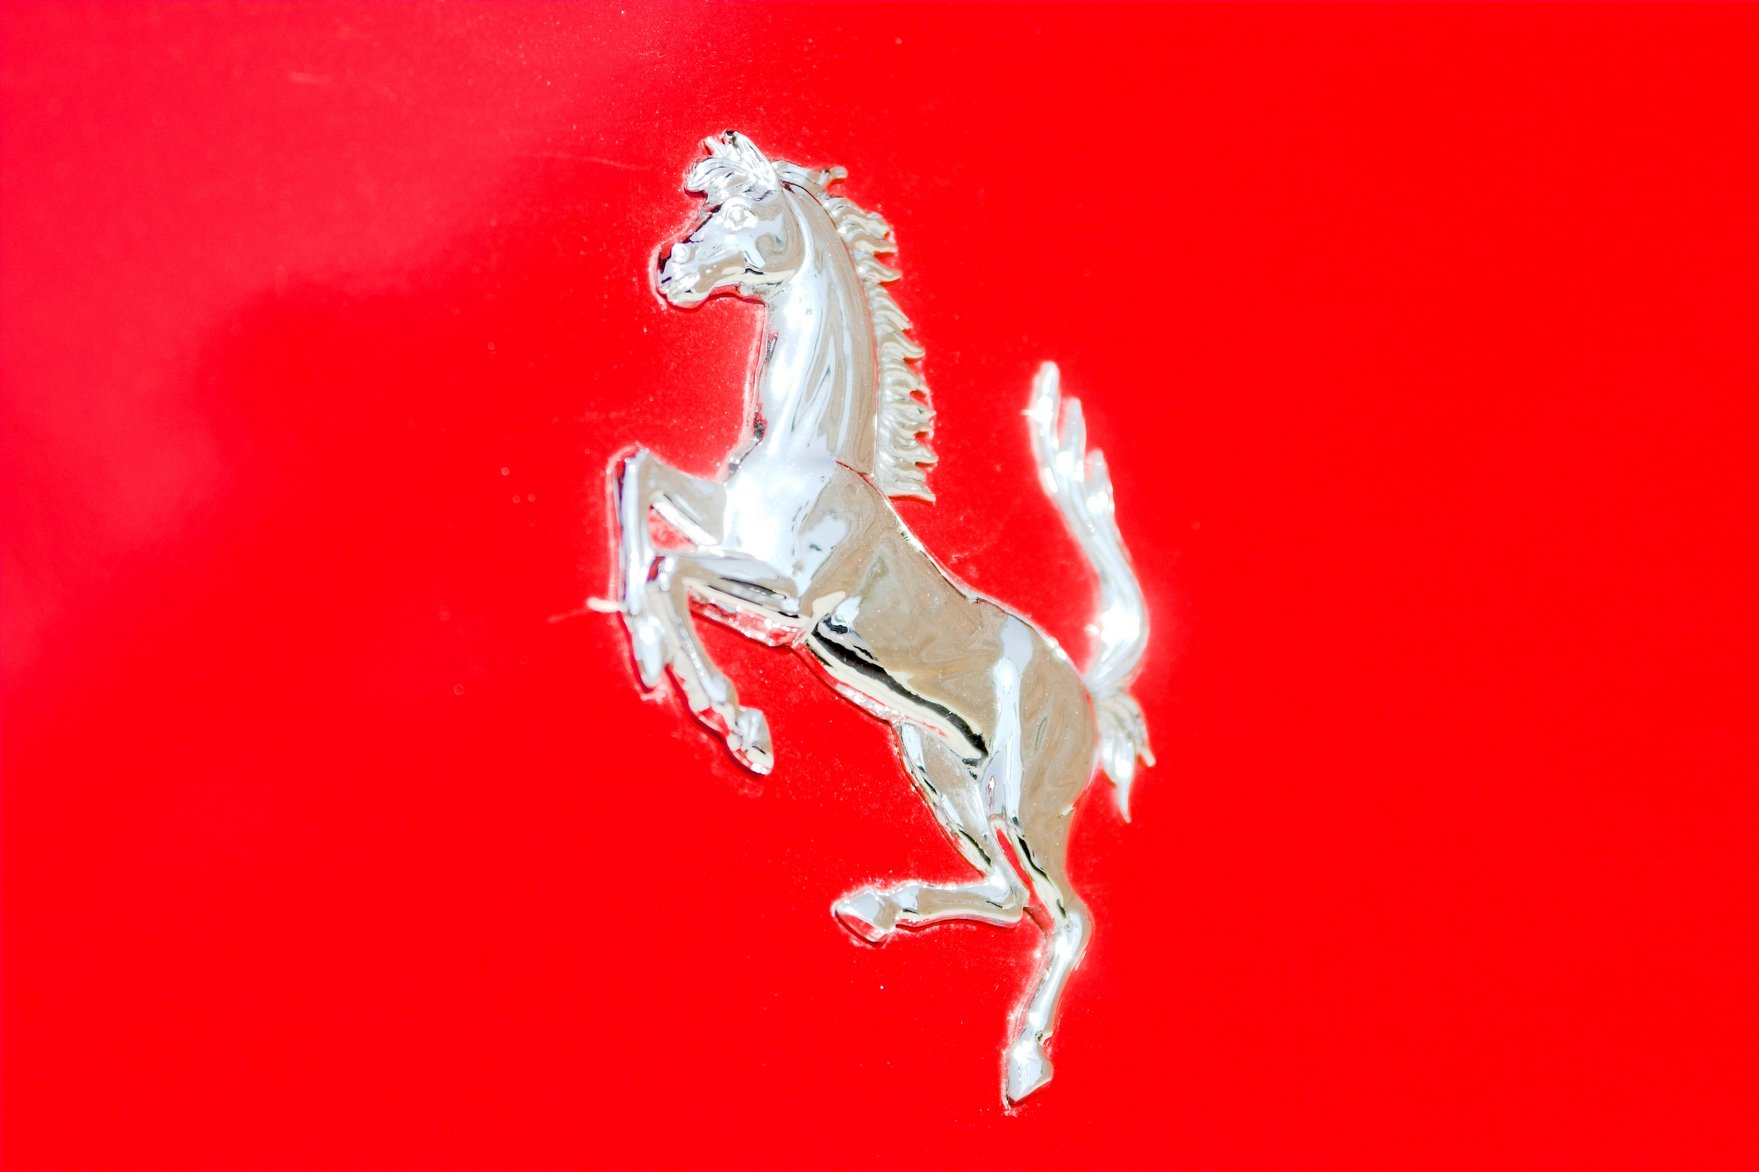 the emblem on the car shows the horse